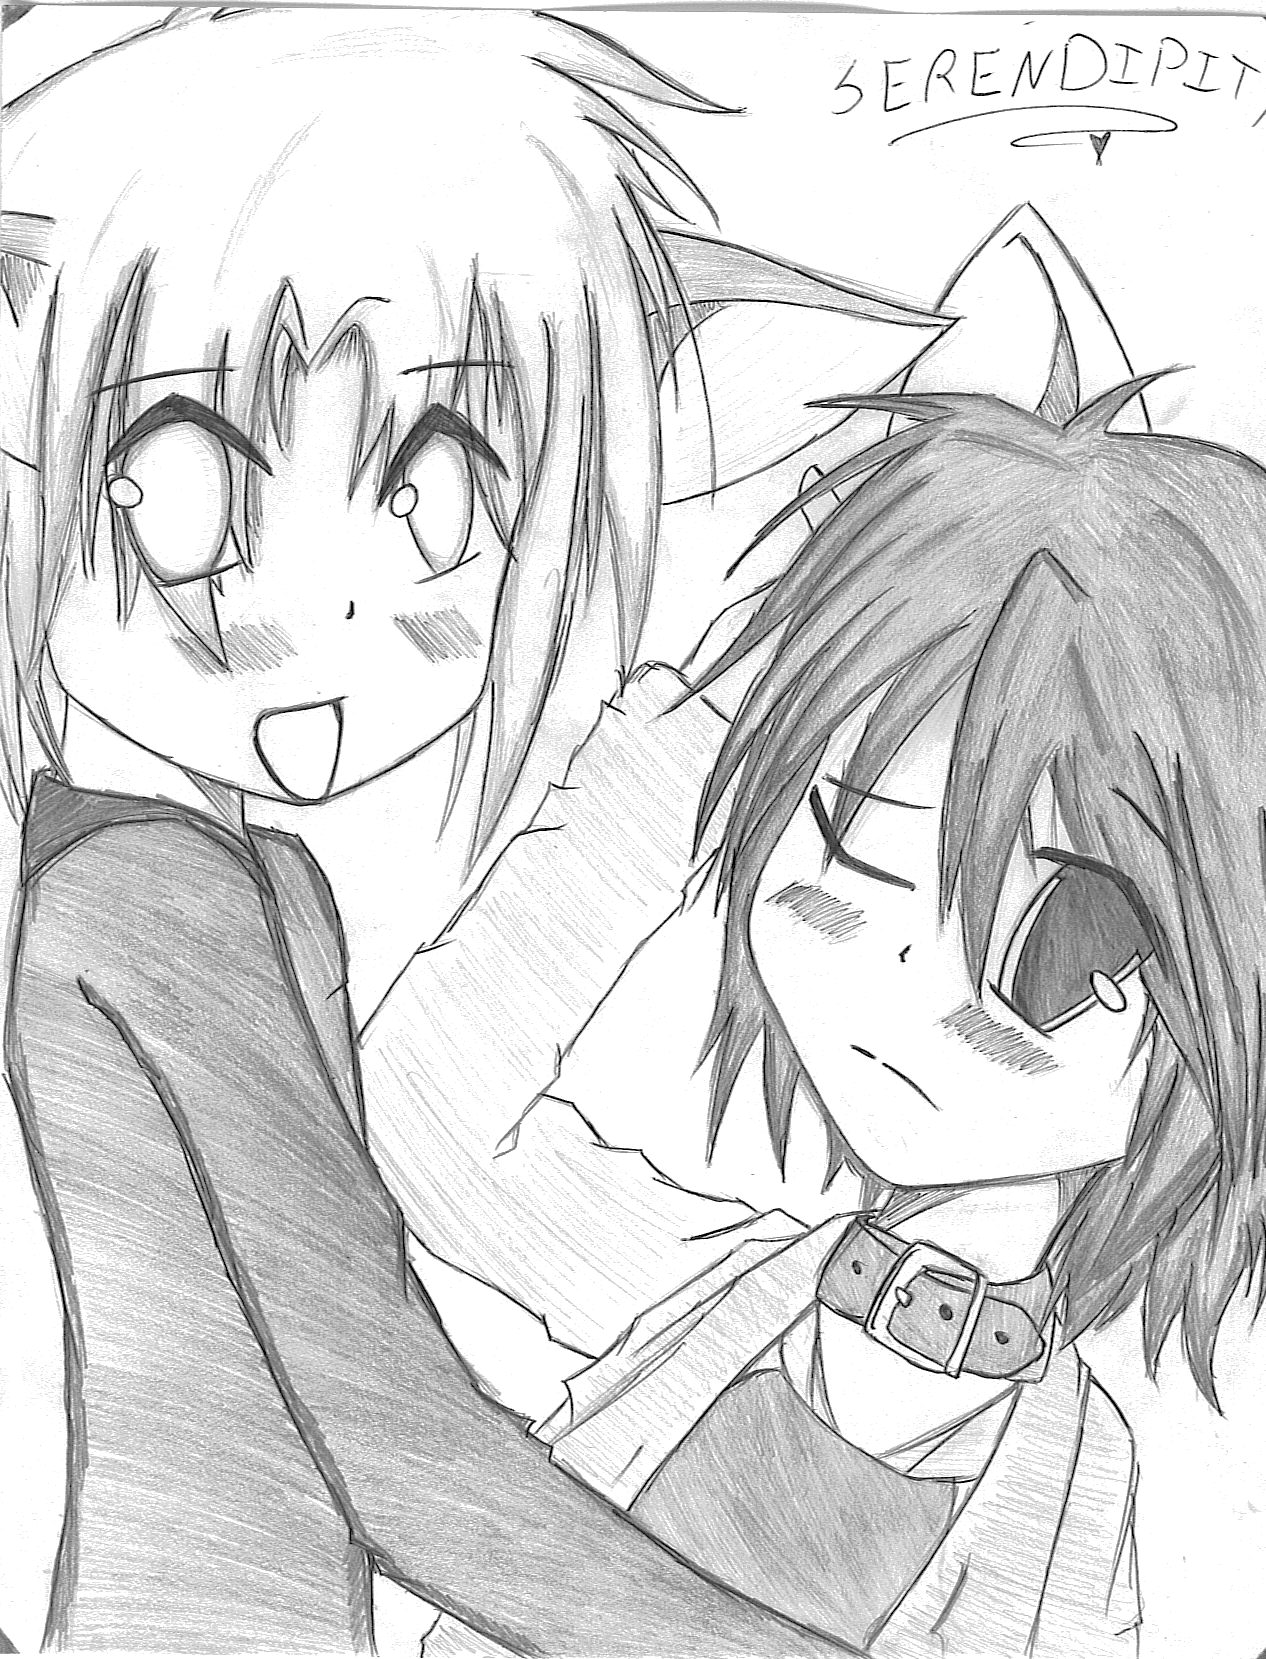 A cute couple [fanart for an internet manga] by IcyNights